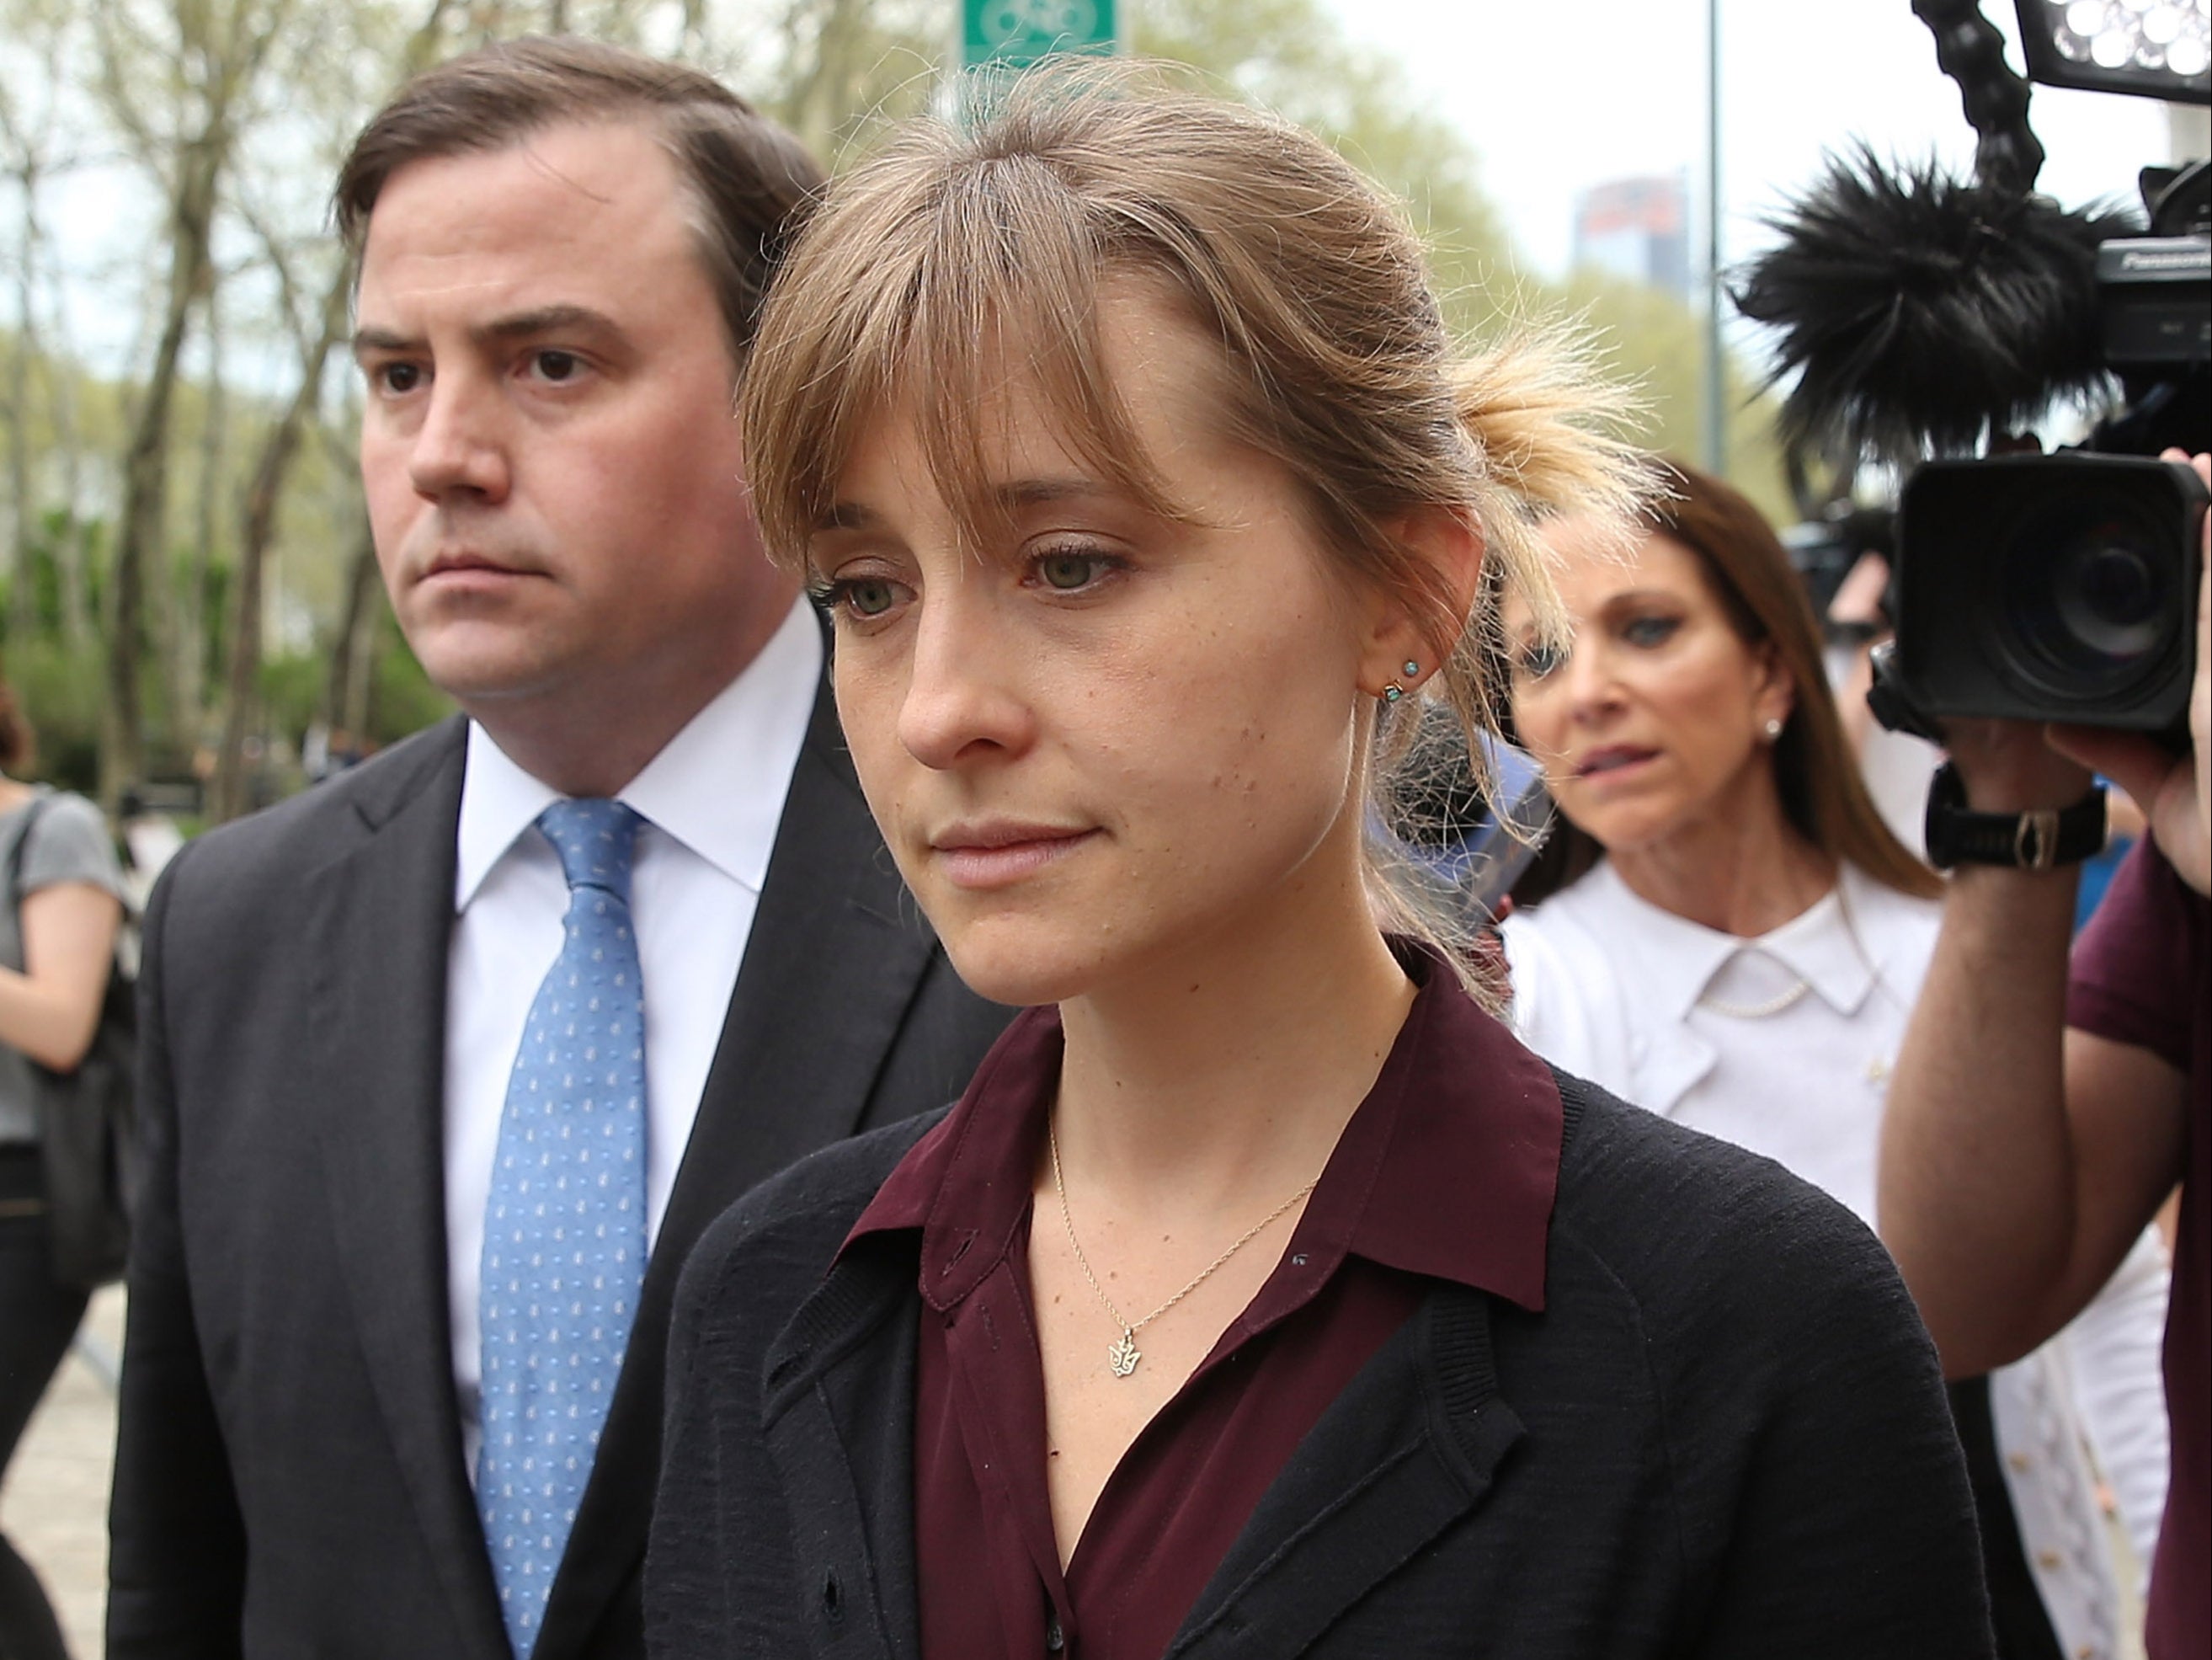 Allison Mack How Smallville star came to be embroiled in criminal sex cult NXIVM The Independent picture picture